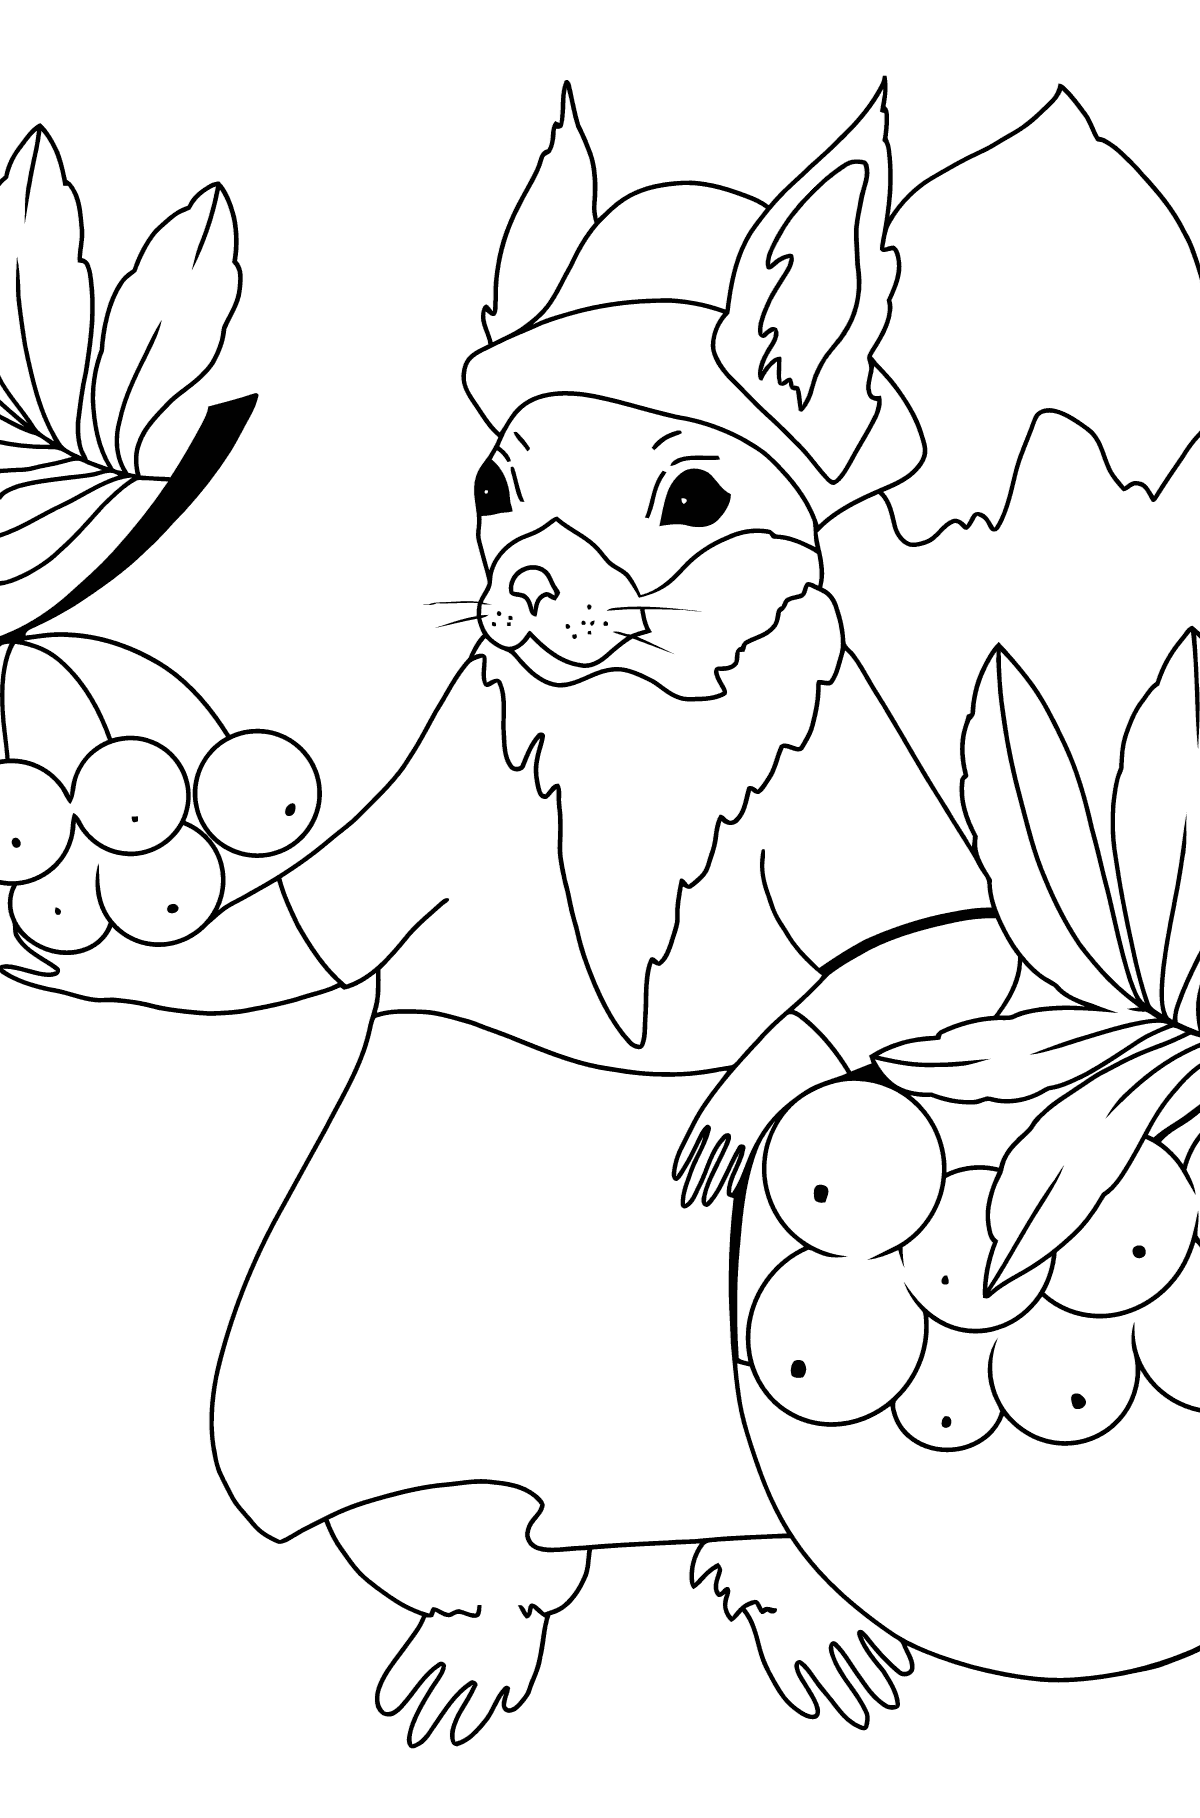 Autumn Coloring Page - A Squirrel with Red Rowanberries for Kids 